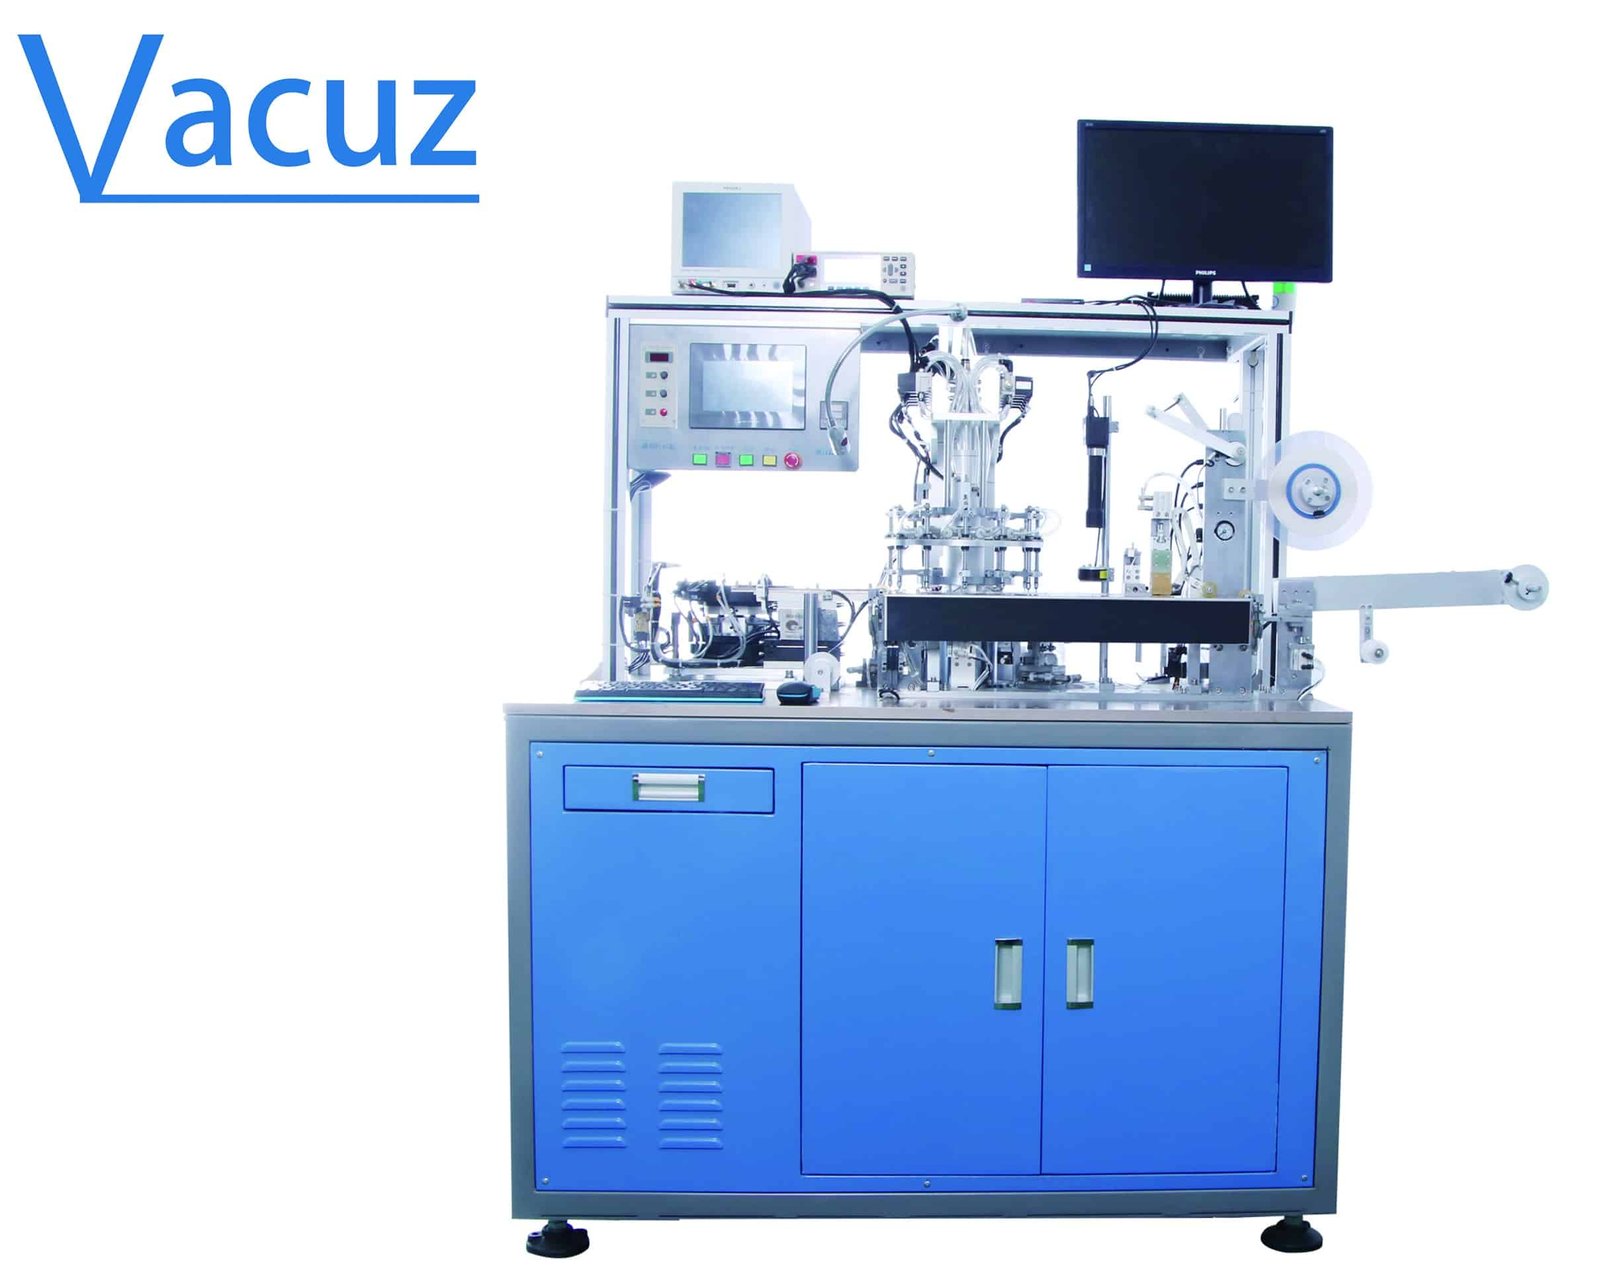 Vacuz High Frequency SMD SMT Chip Micro 0402 0603 0805 1206 1210 1812 Inductor Coil Automatic Testing And Carrier Tape Packaging Machine